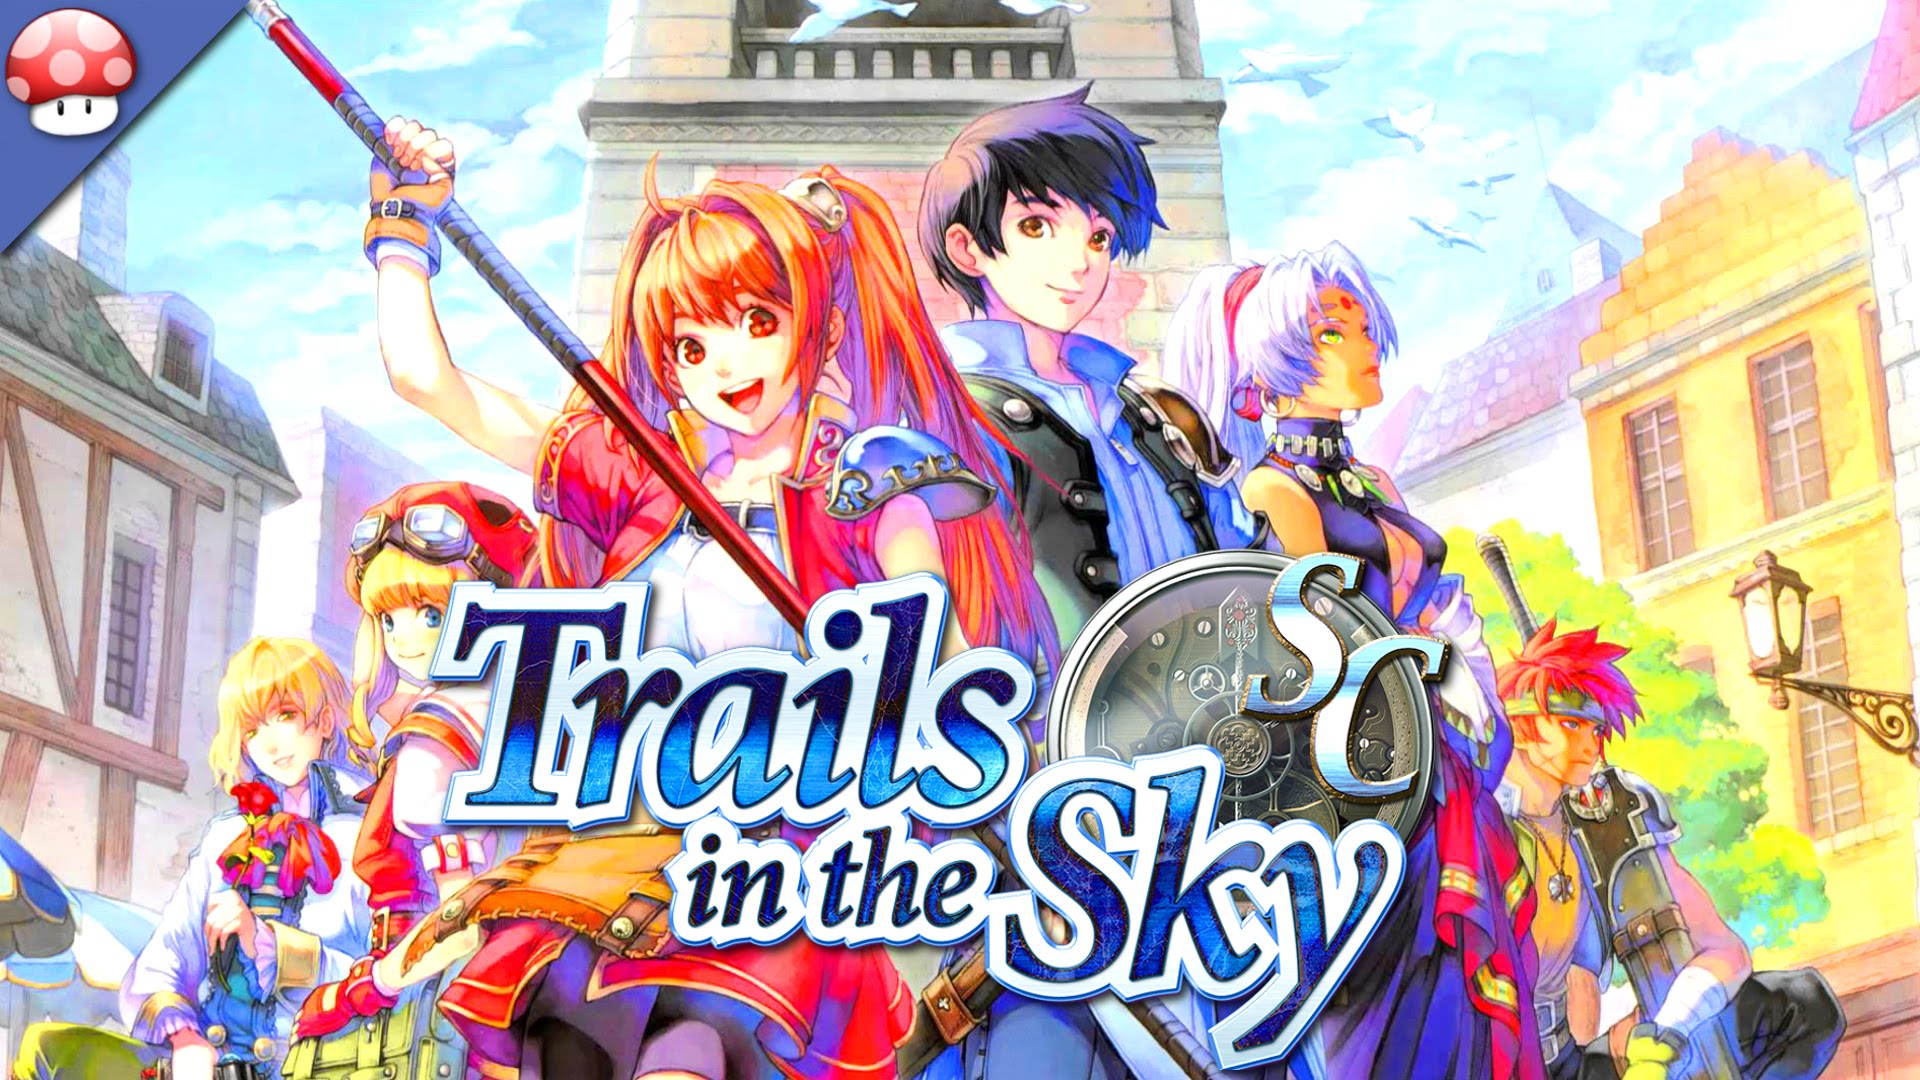 The Legend Of Heroes: Trails In The Sky HD wallpapers, Desktop wallpaper - most viewed